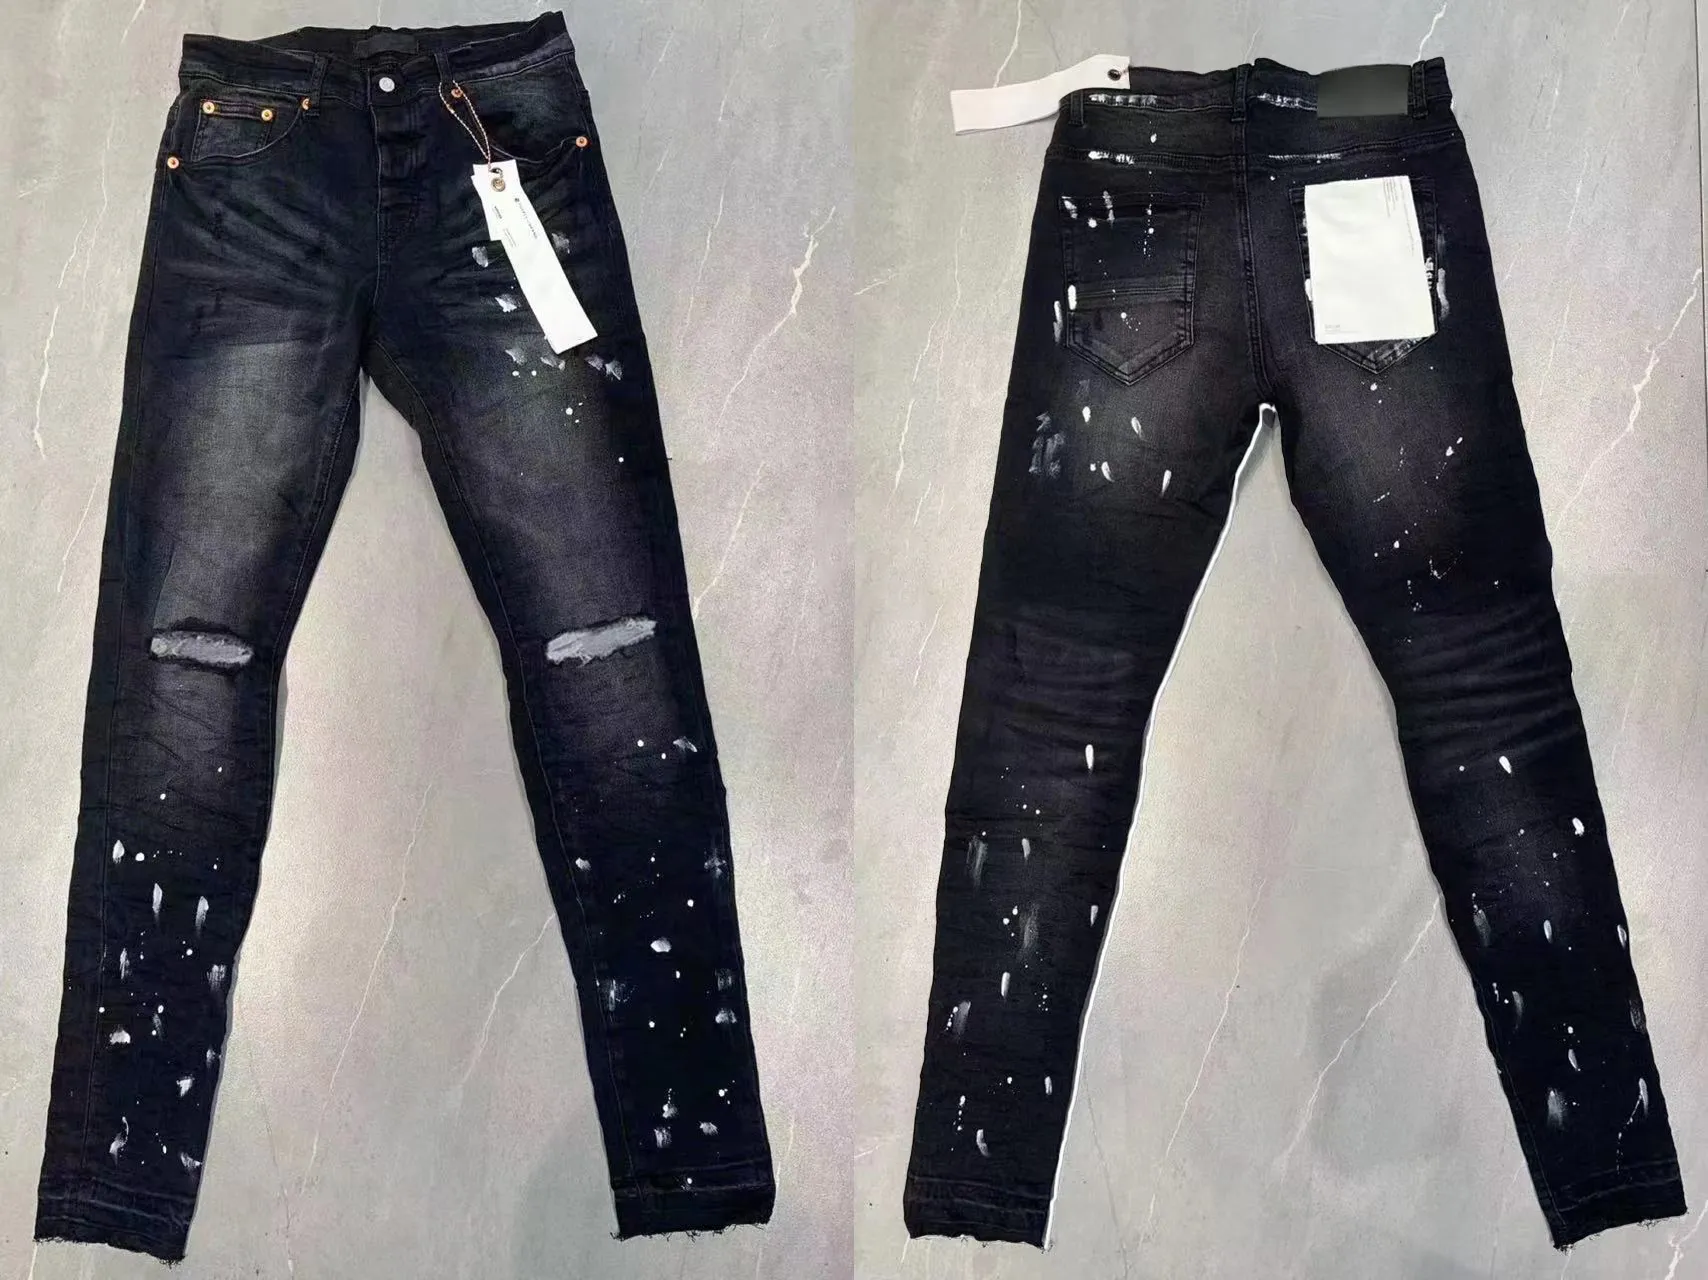 Mens Designer Skinny Ripped Purple Citizens Of Humanity Jeans With Bkinny  Pants And Stack 1.5S94 From Dh_gh1, $21.67